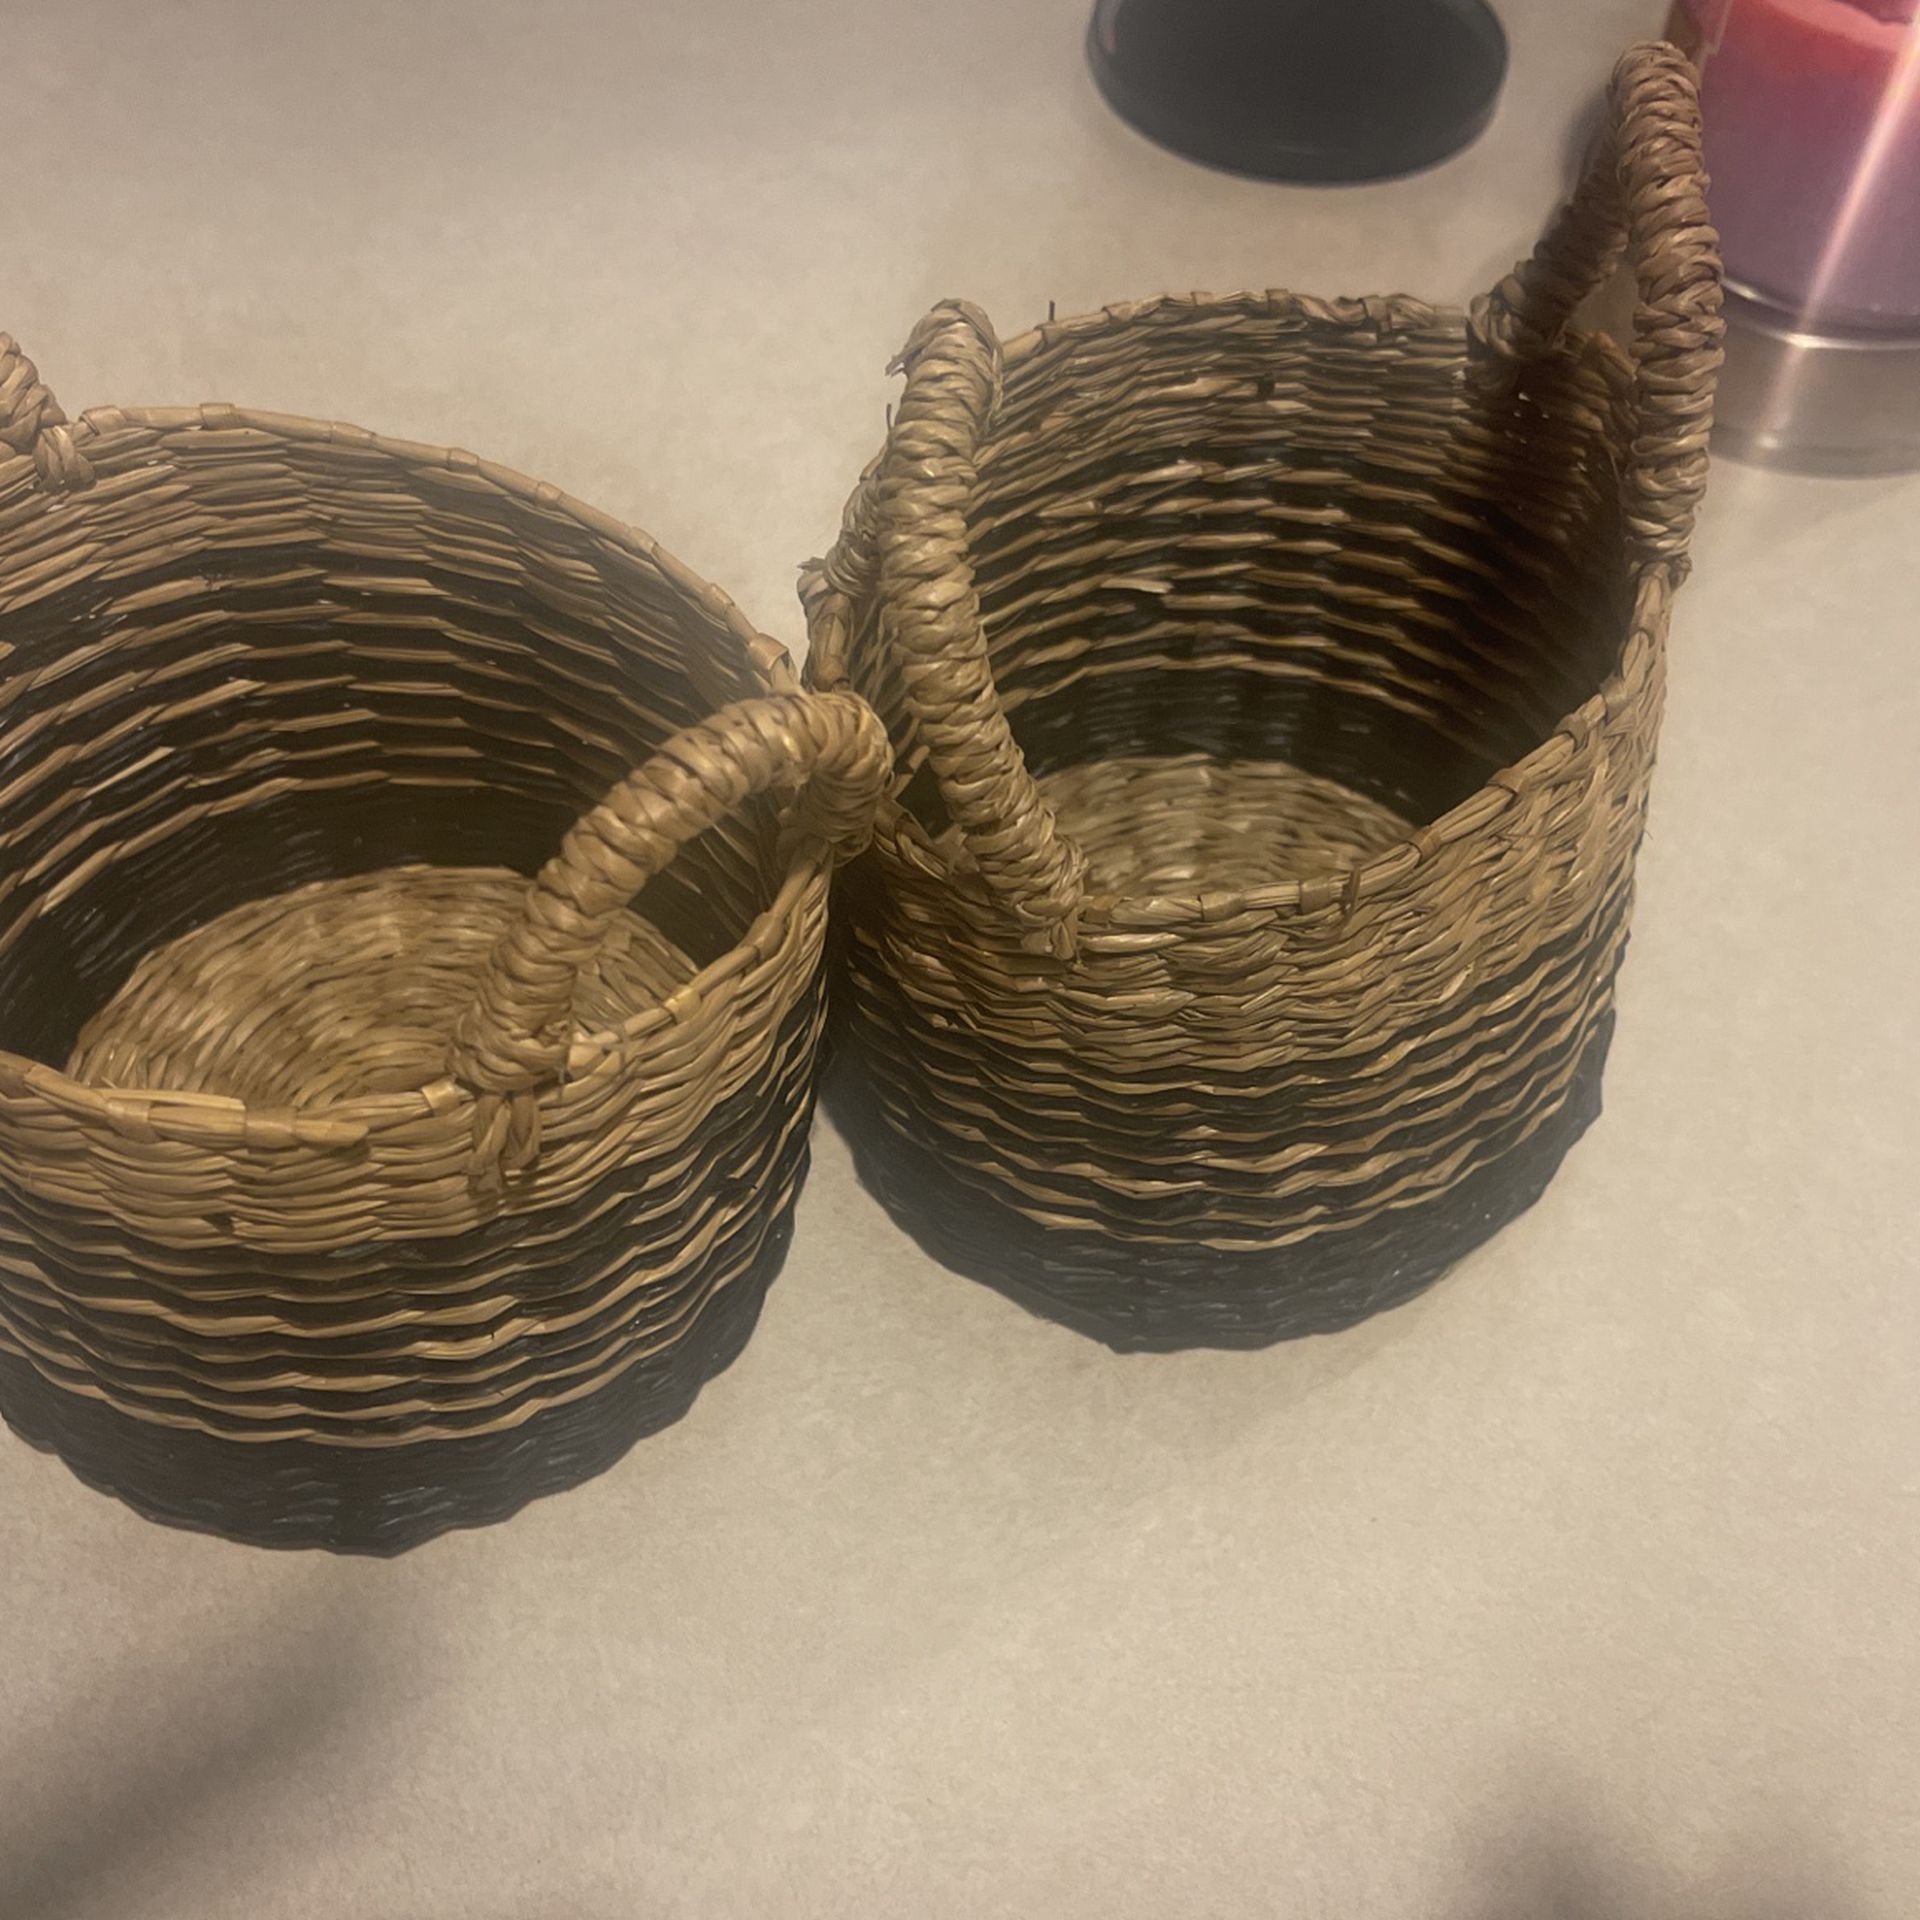 2 Small / Med Wicker planters/baskets /storage(NEW)